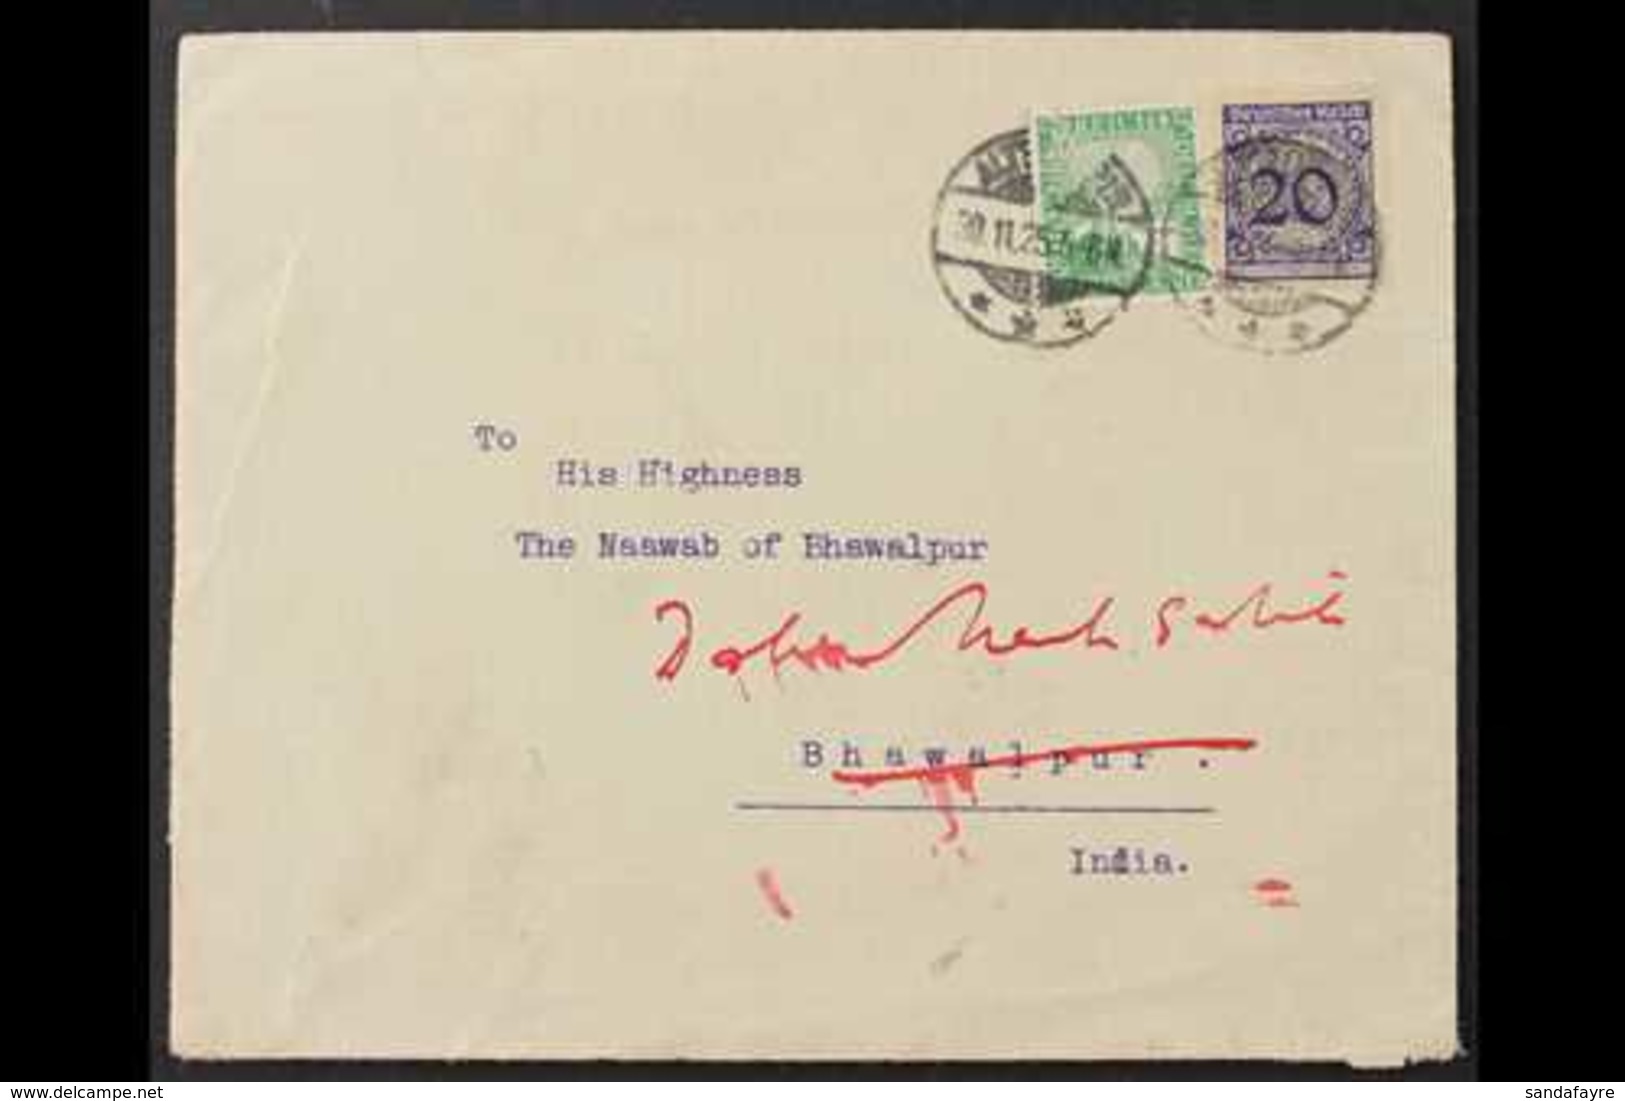 1925 (Nov) Scarce Inward Cover From Germany, Addressed To The Naawab, With Bahawalpur Arrival Cds On Reverse, Some Rough - Bahawalpur